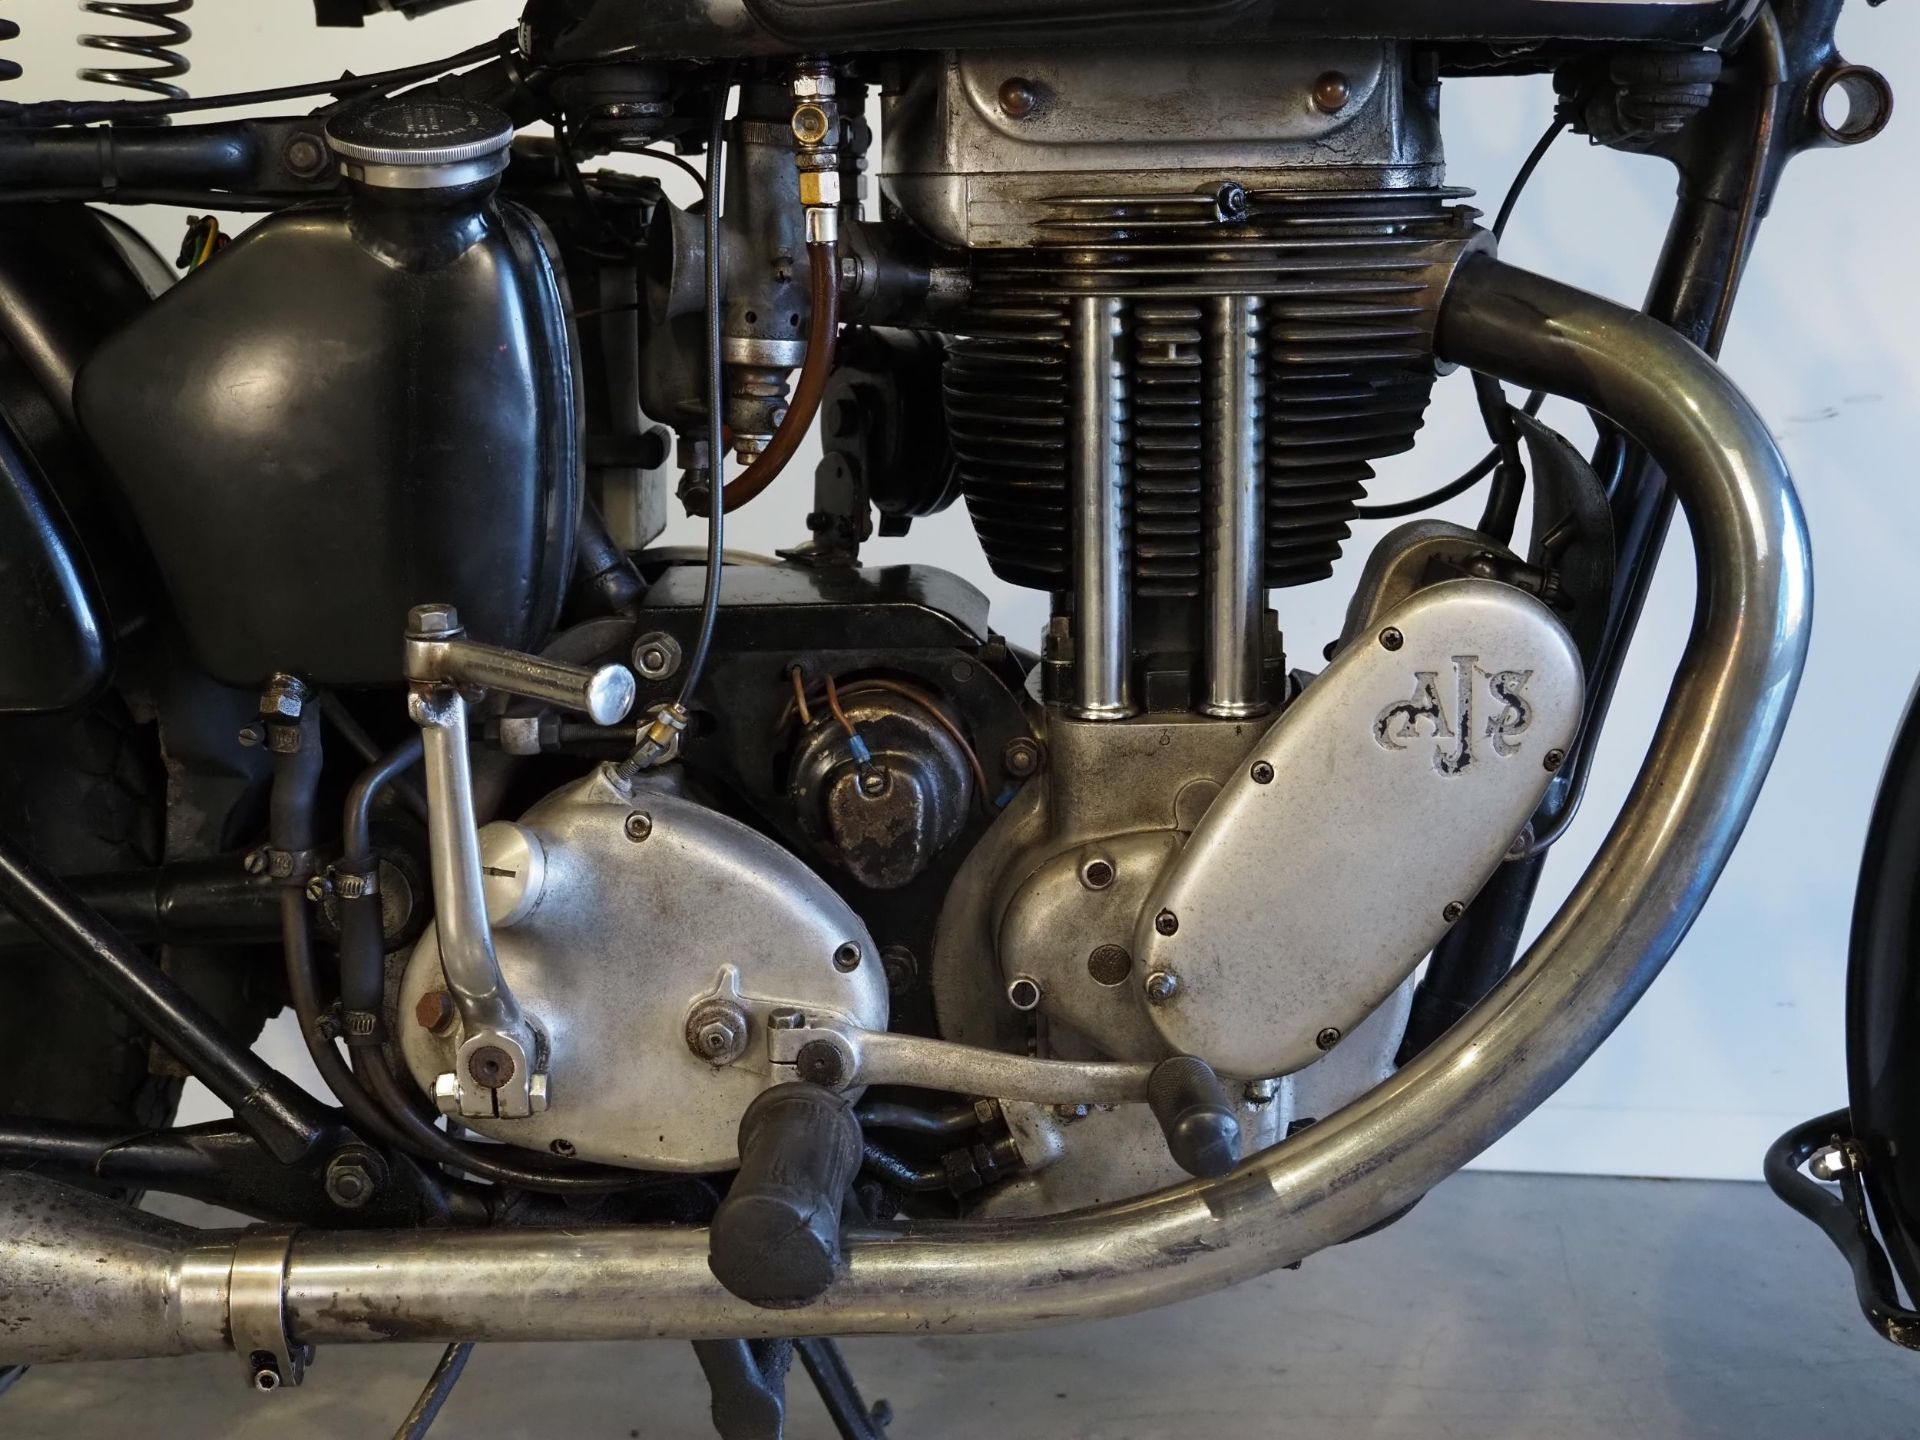 AJS 18S motorcycle. 1952. 498cc Frame No. 76770 Engine No. 19433 Last ridden in July 2023 so will - Image 5 of 10